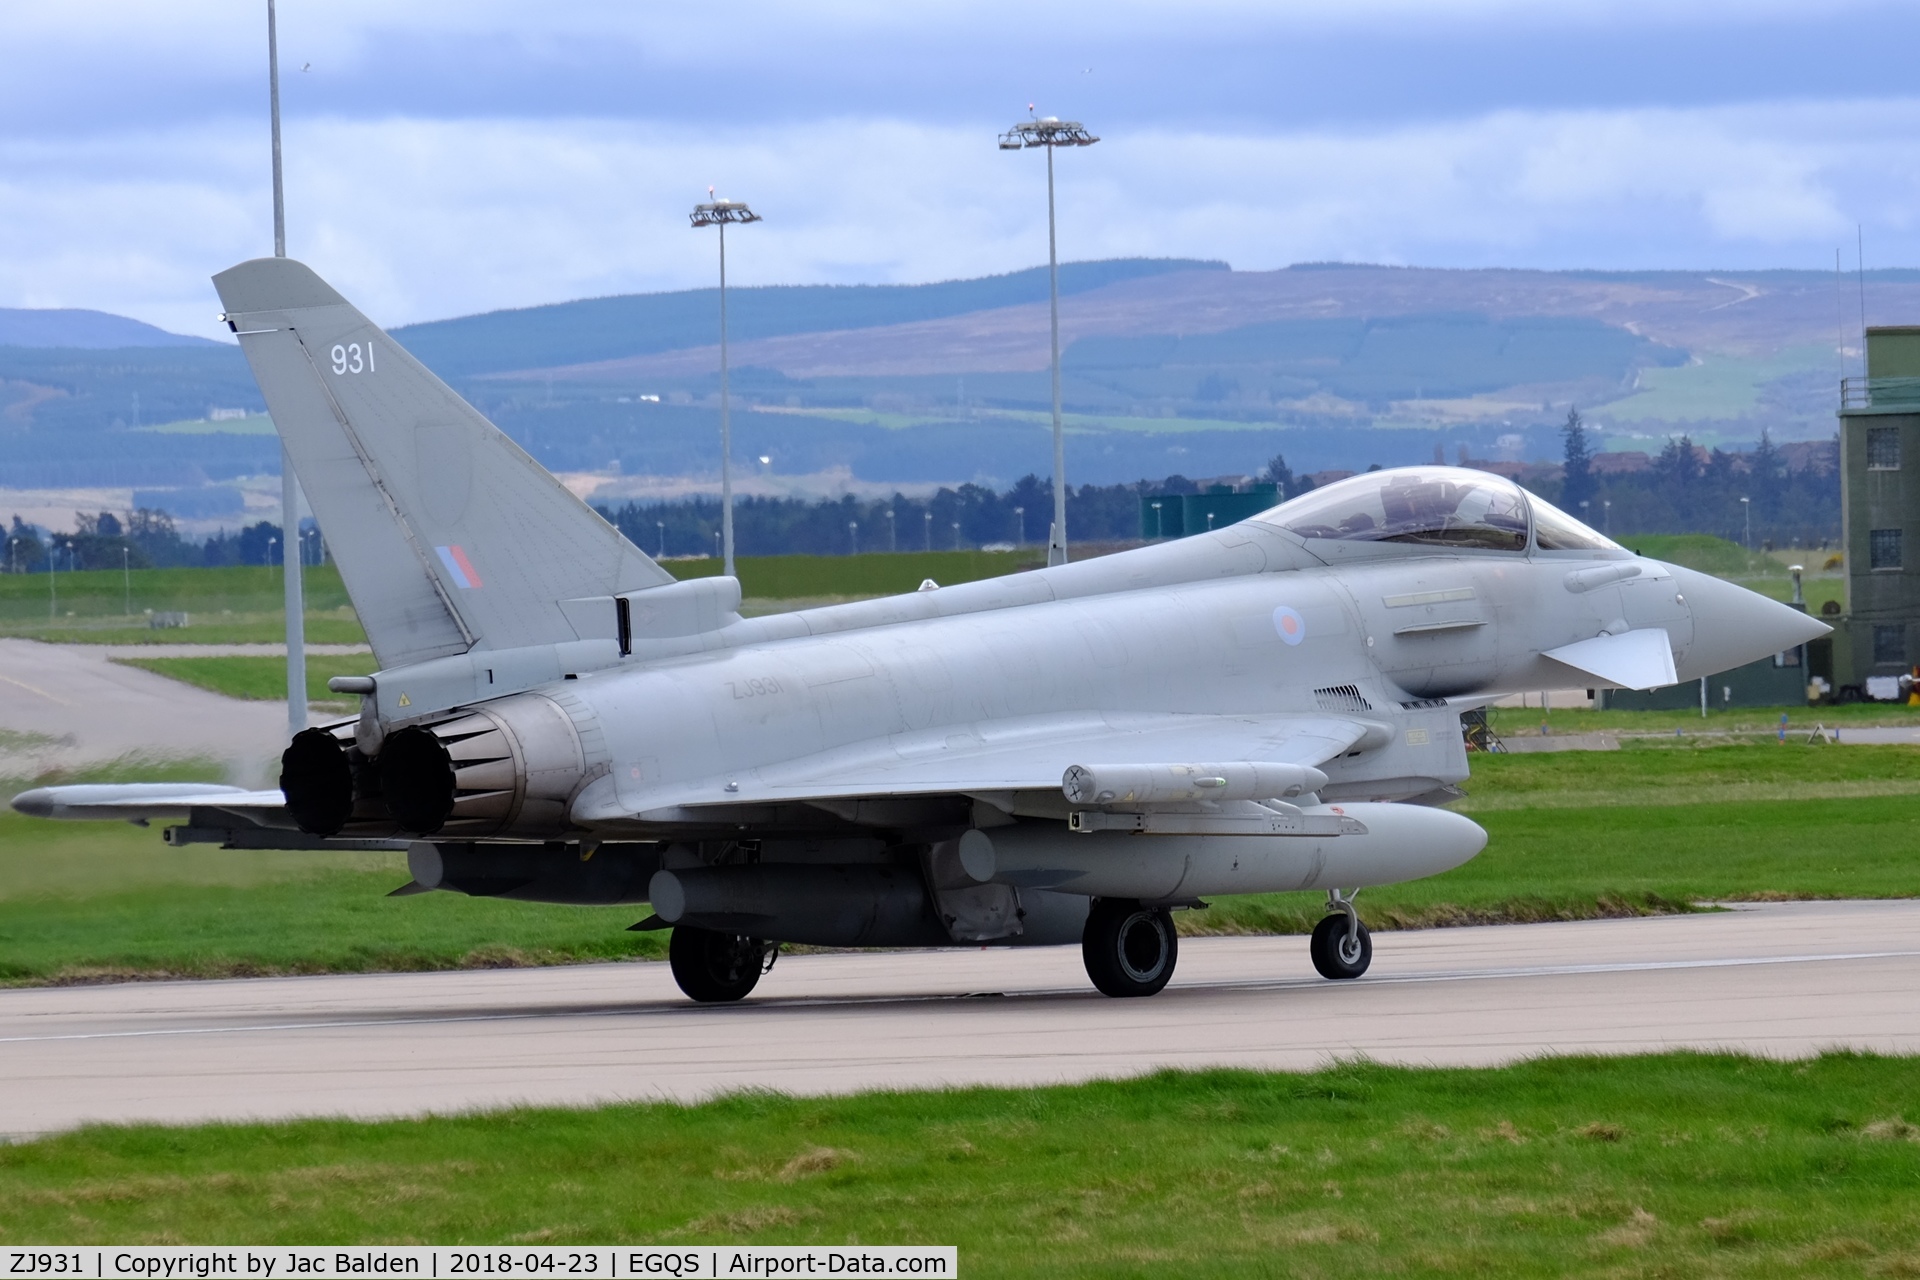 ZJ931, 2007 Eurofighter EF-2000 Typhoon FGR4 C/N 0103/BS022, ZJ931 leaving Lossiemouth for Romania as part of II(AC) Sqn for the Baltic air policing role